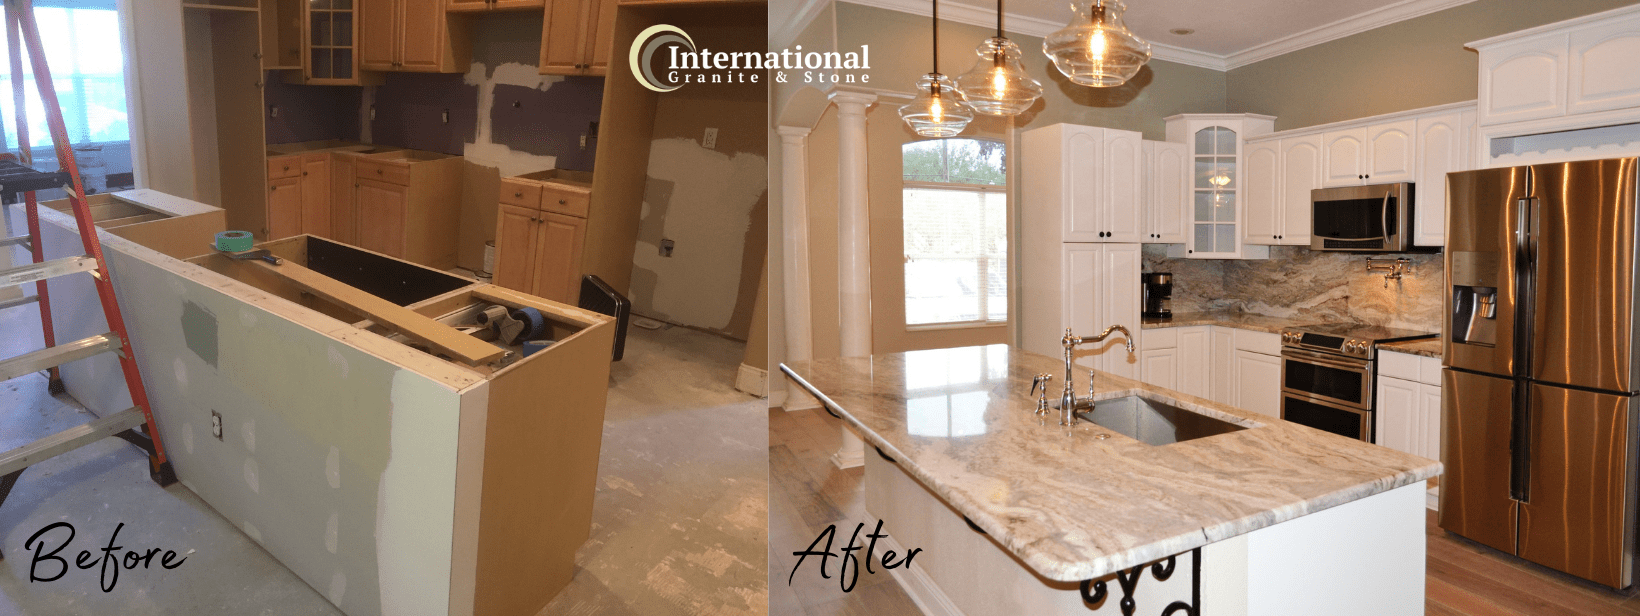 Before and After Brown Fantasy Granite Quartzite Kitchen Countertops Remodel white cabinets